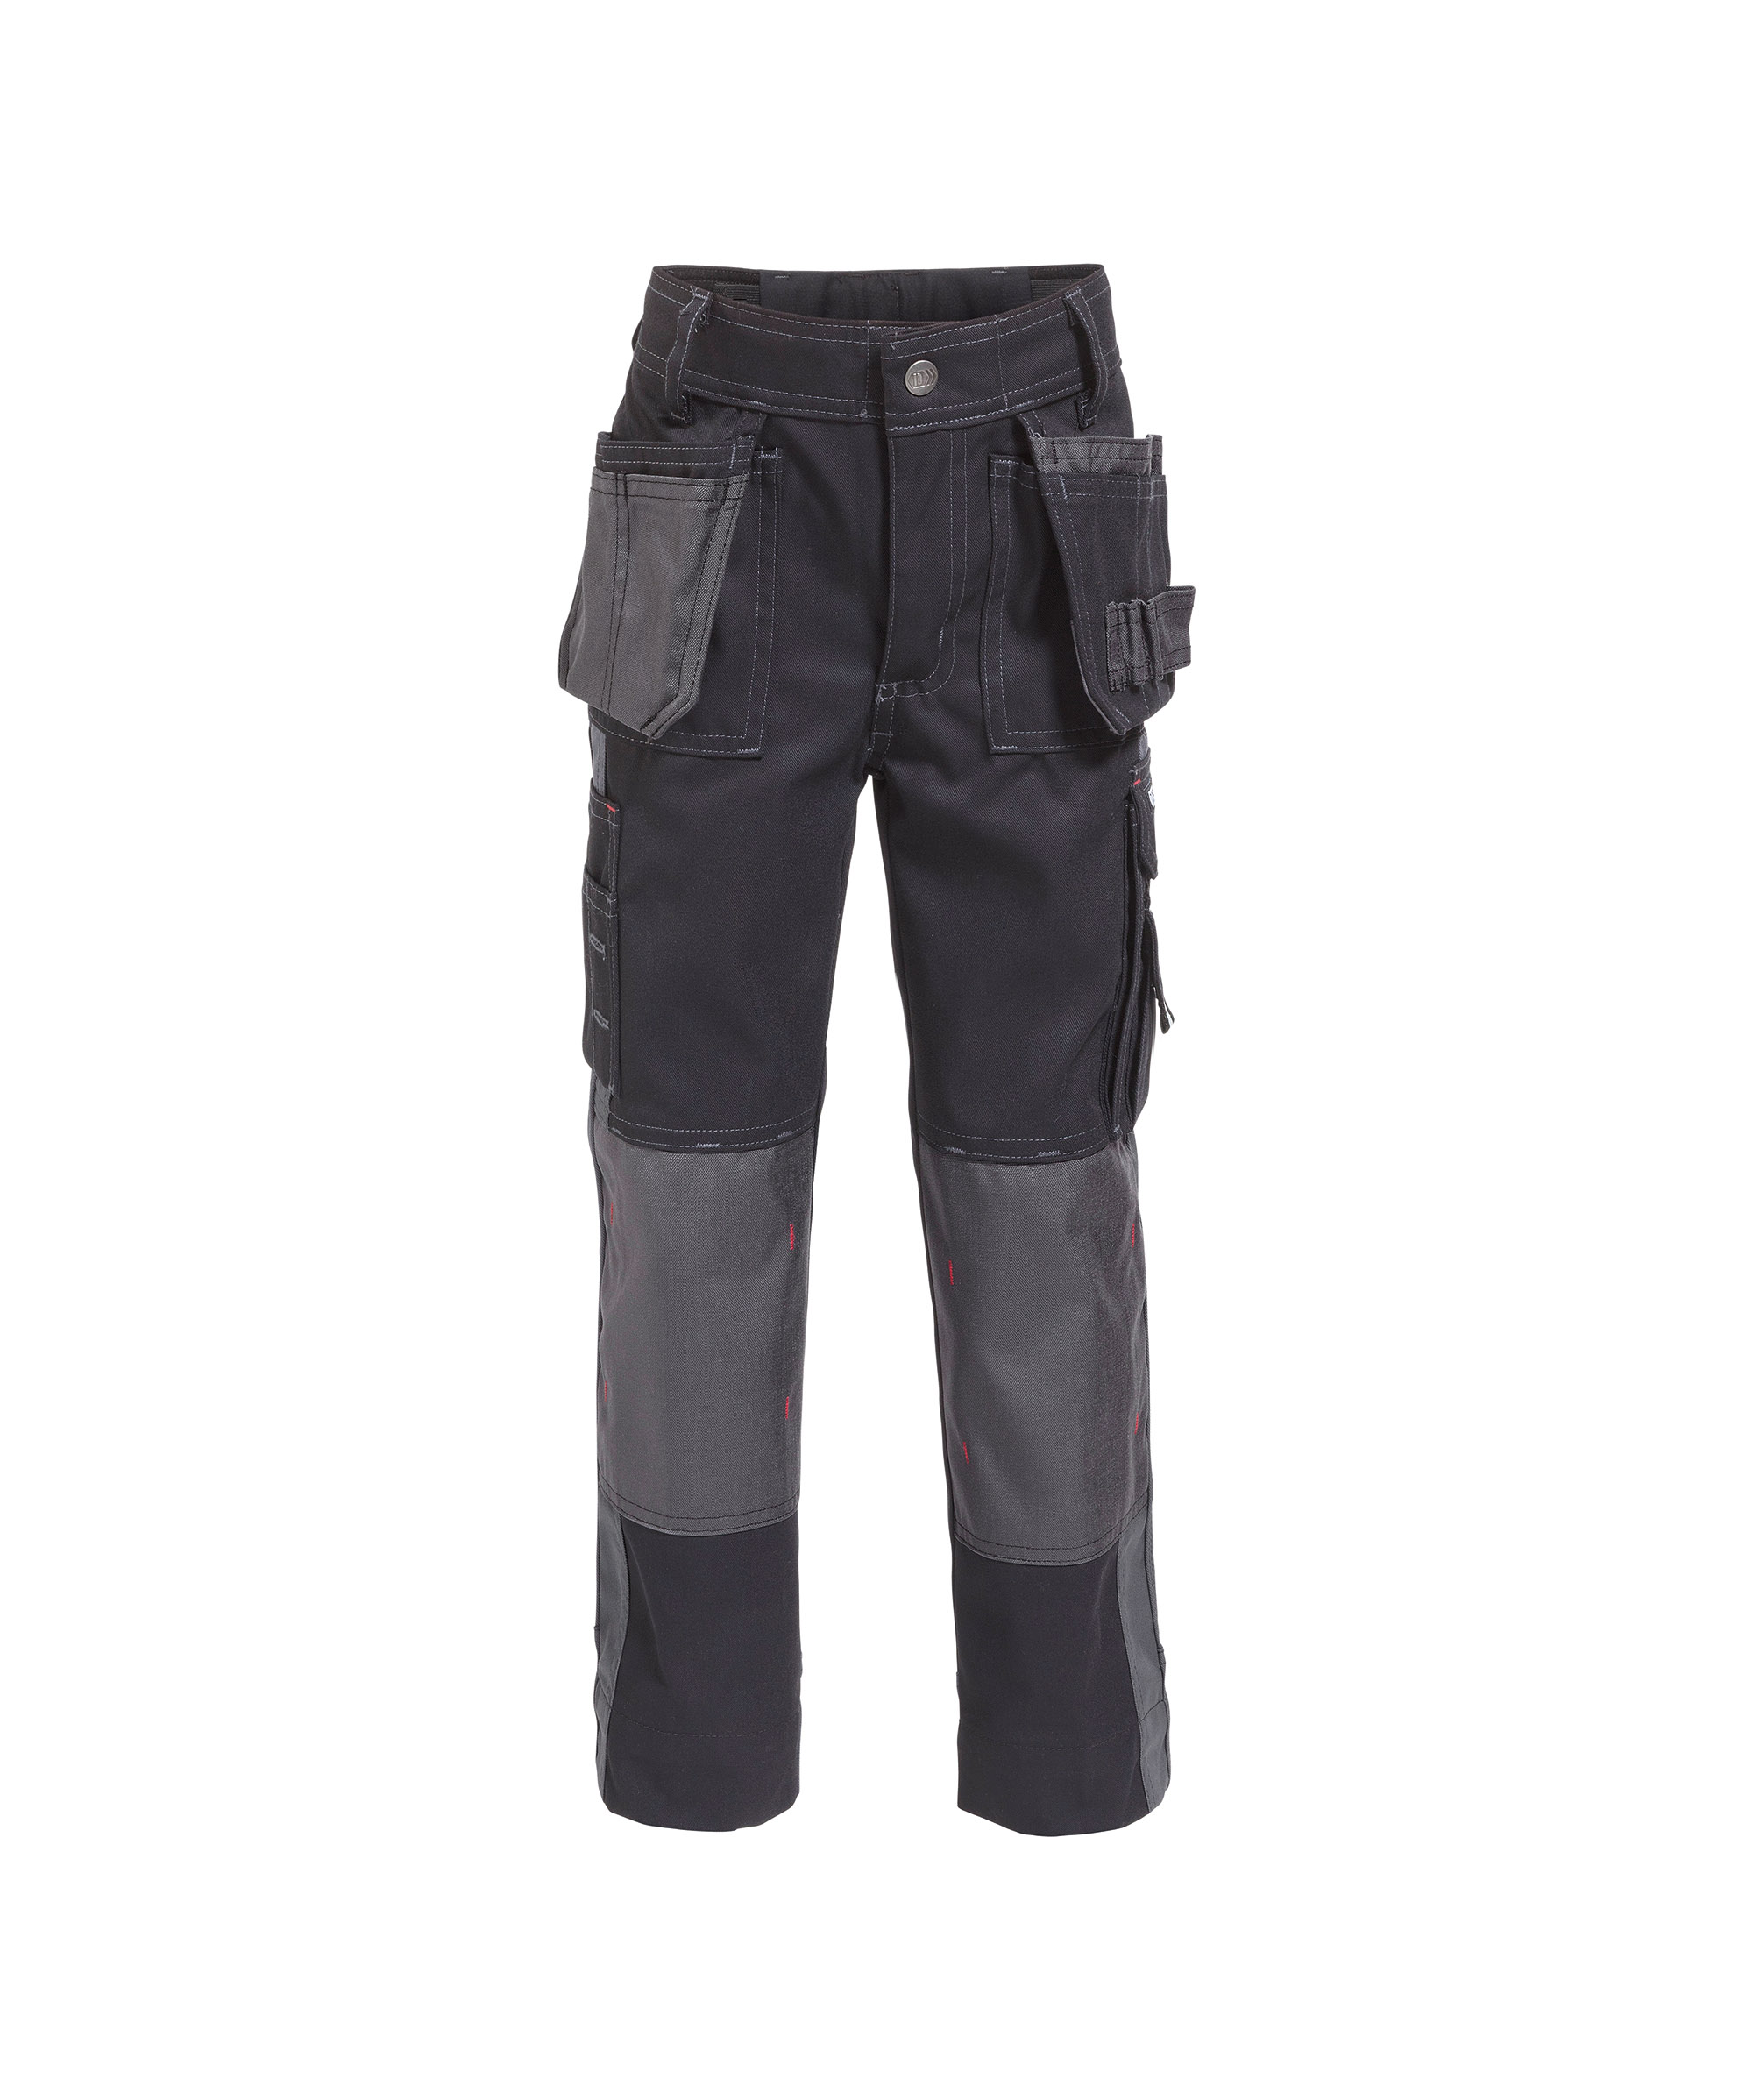 seattle-kids_two-tone-work-trousers-with-multi-pockets_black-cement-grey_front.jpg